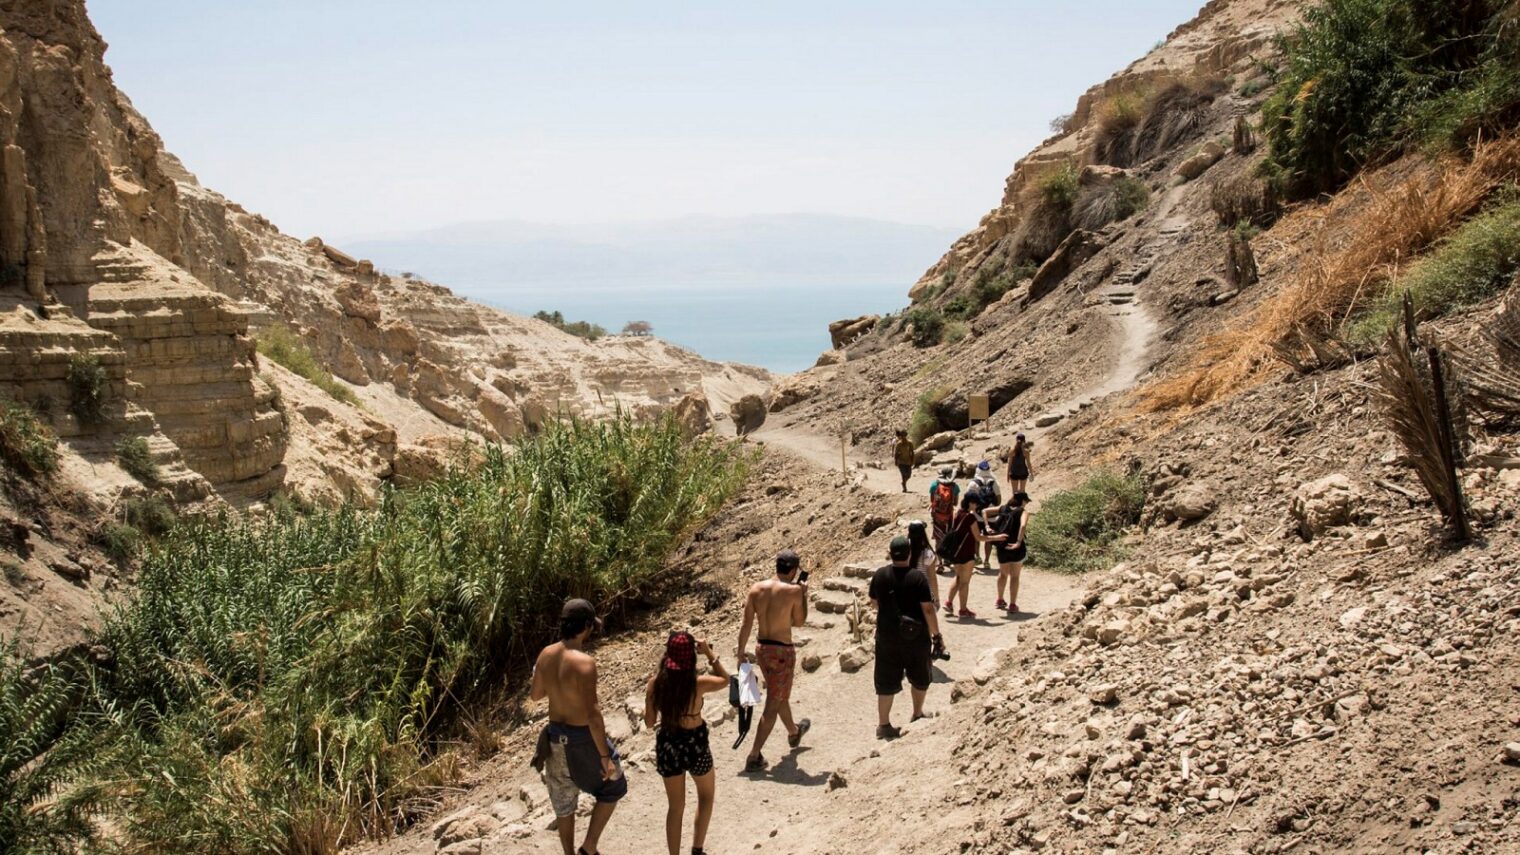 Hikers at the Ein Gedi Nature Reserve near the Dead Sea. Photo by Zack Wajsgras/Flash90